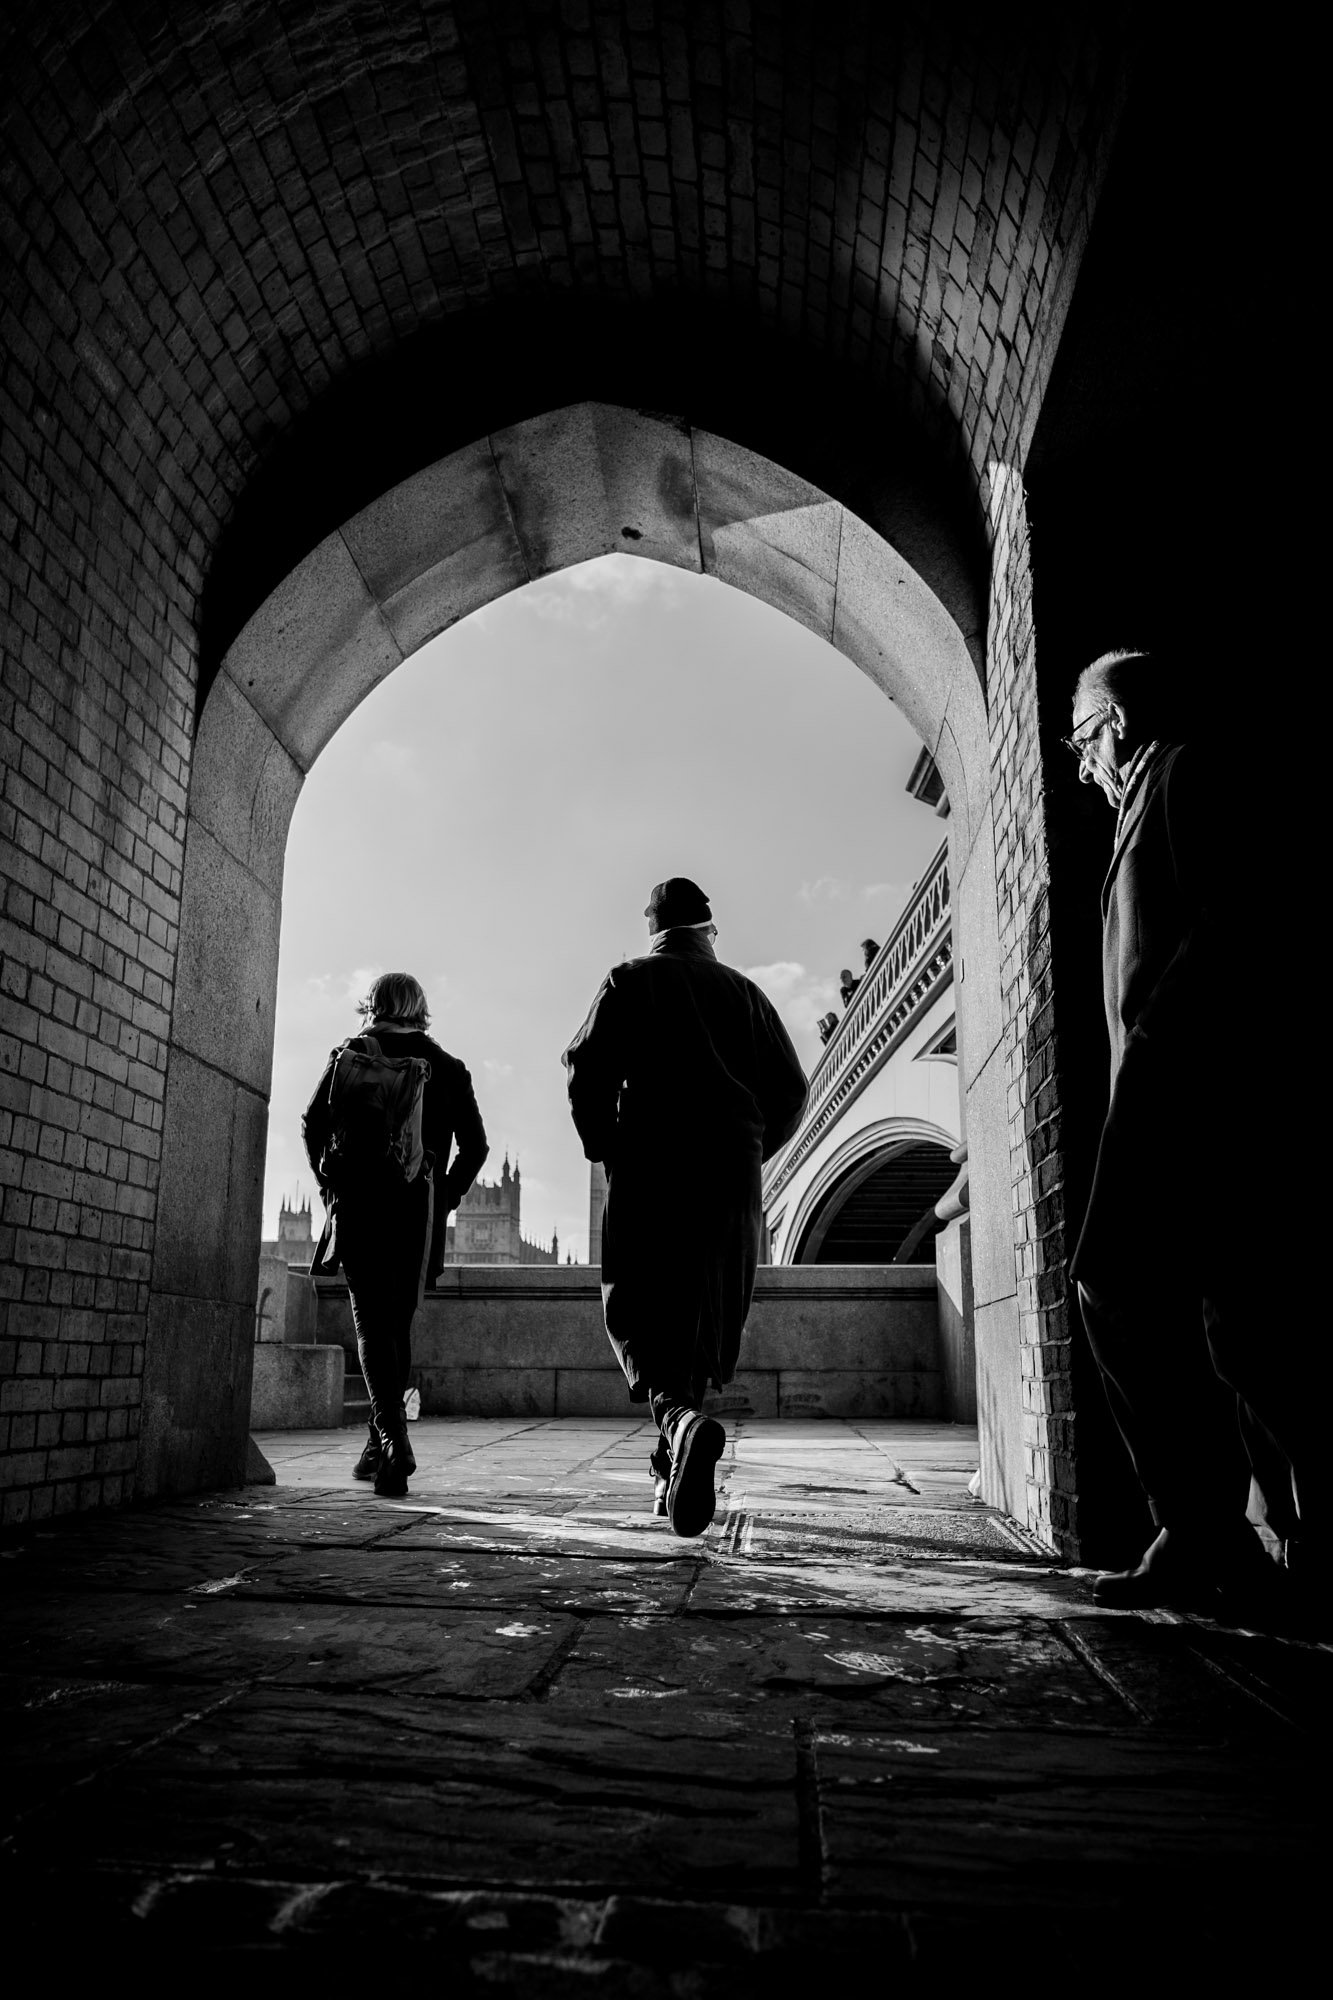 Street Photography - Black and White - Fujifilm - Andy Kirby - MrKirby Photography-01.jpg